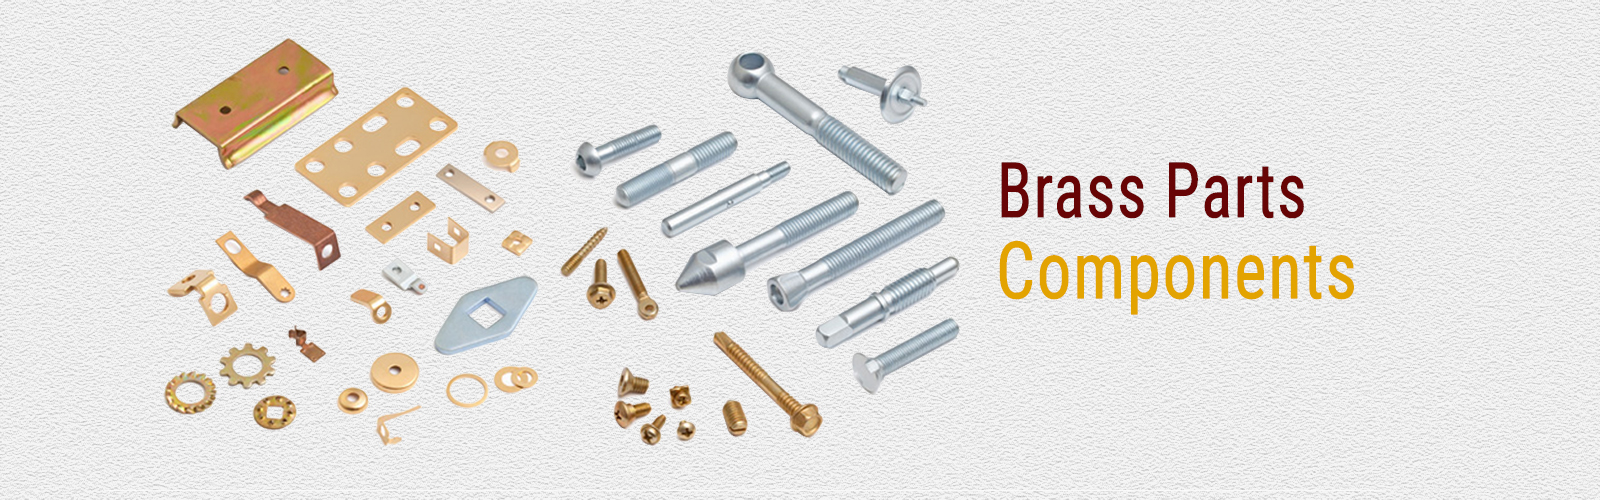 Brass Parts Components Exporter